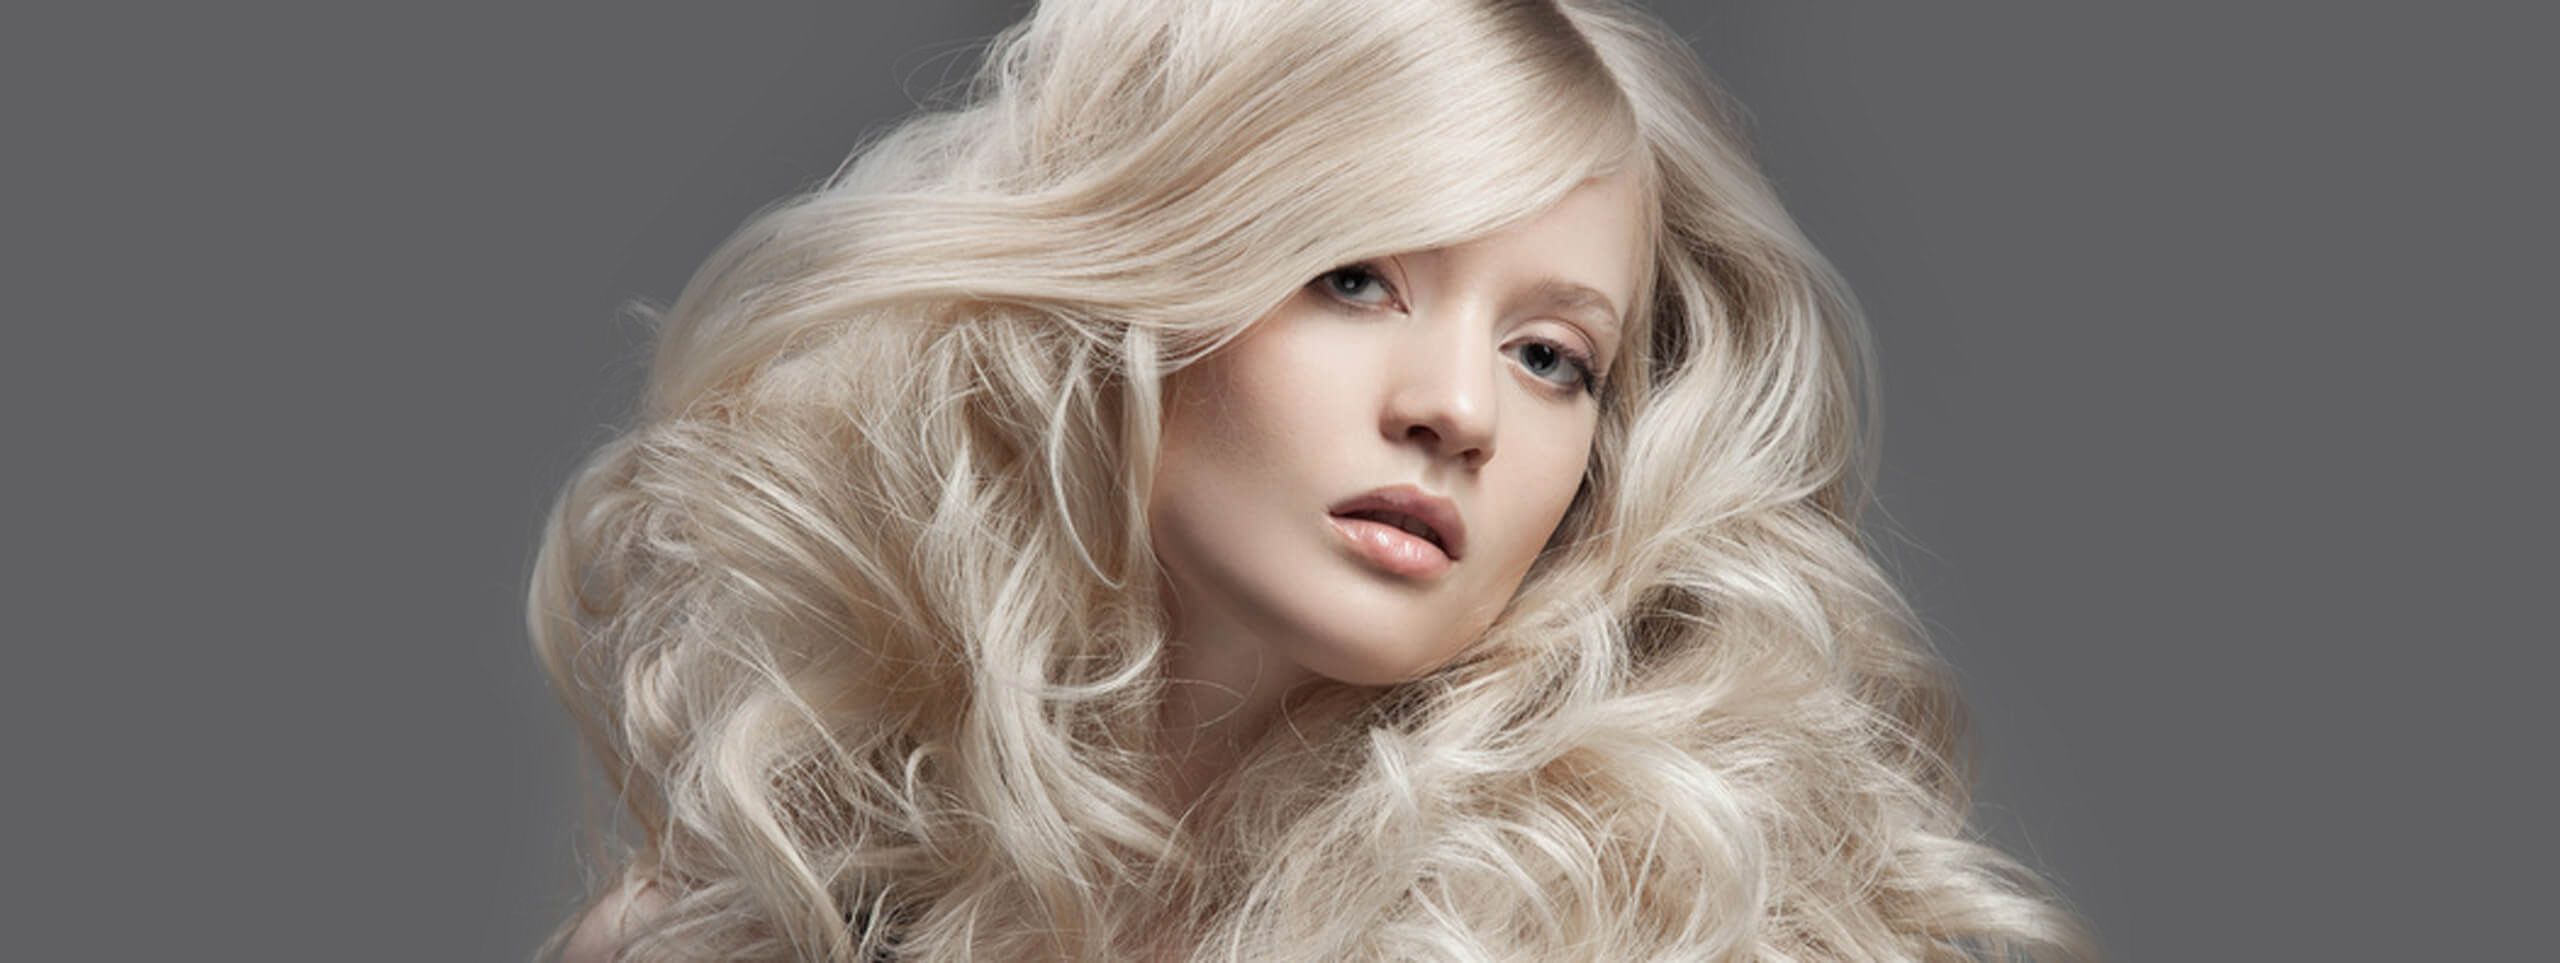 Model with blonde curly hairstyle